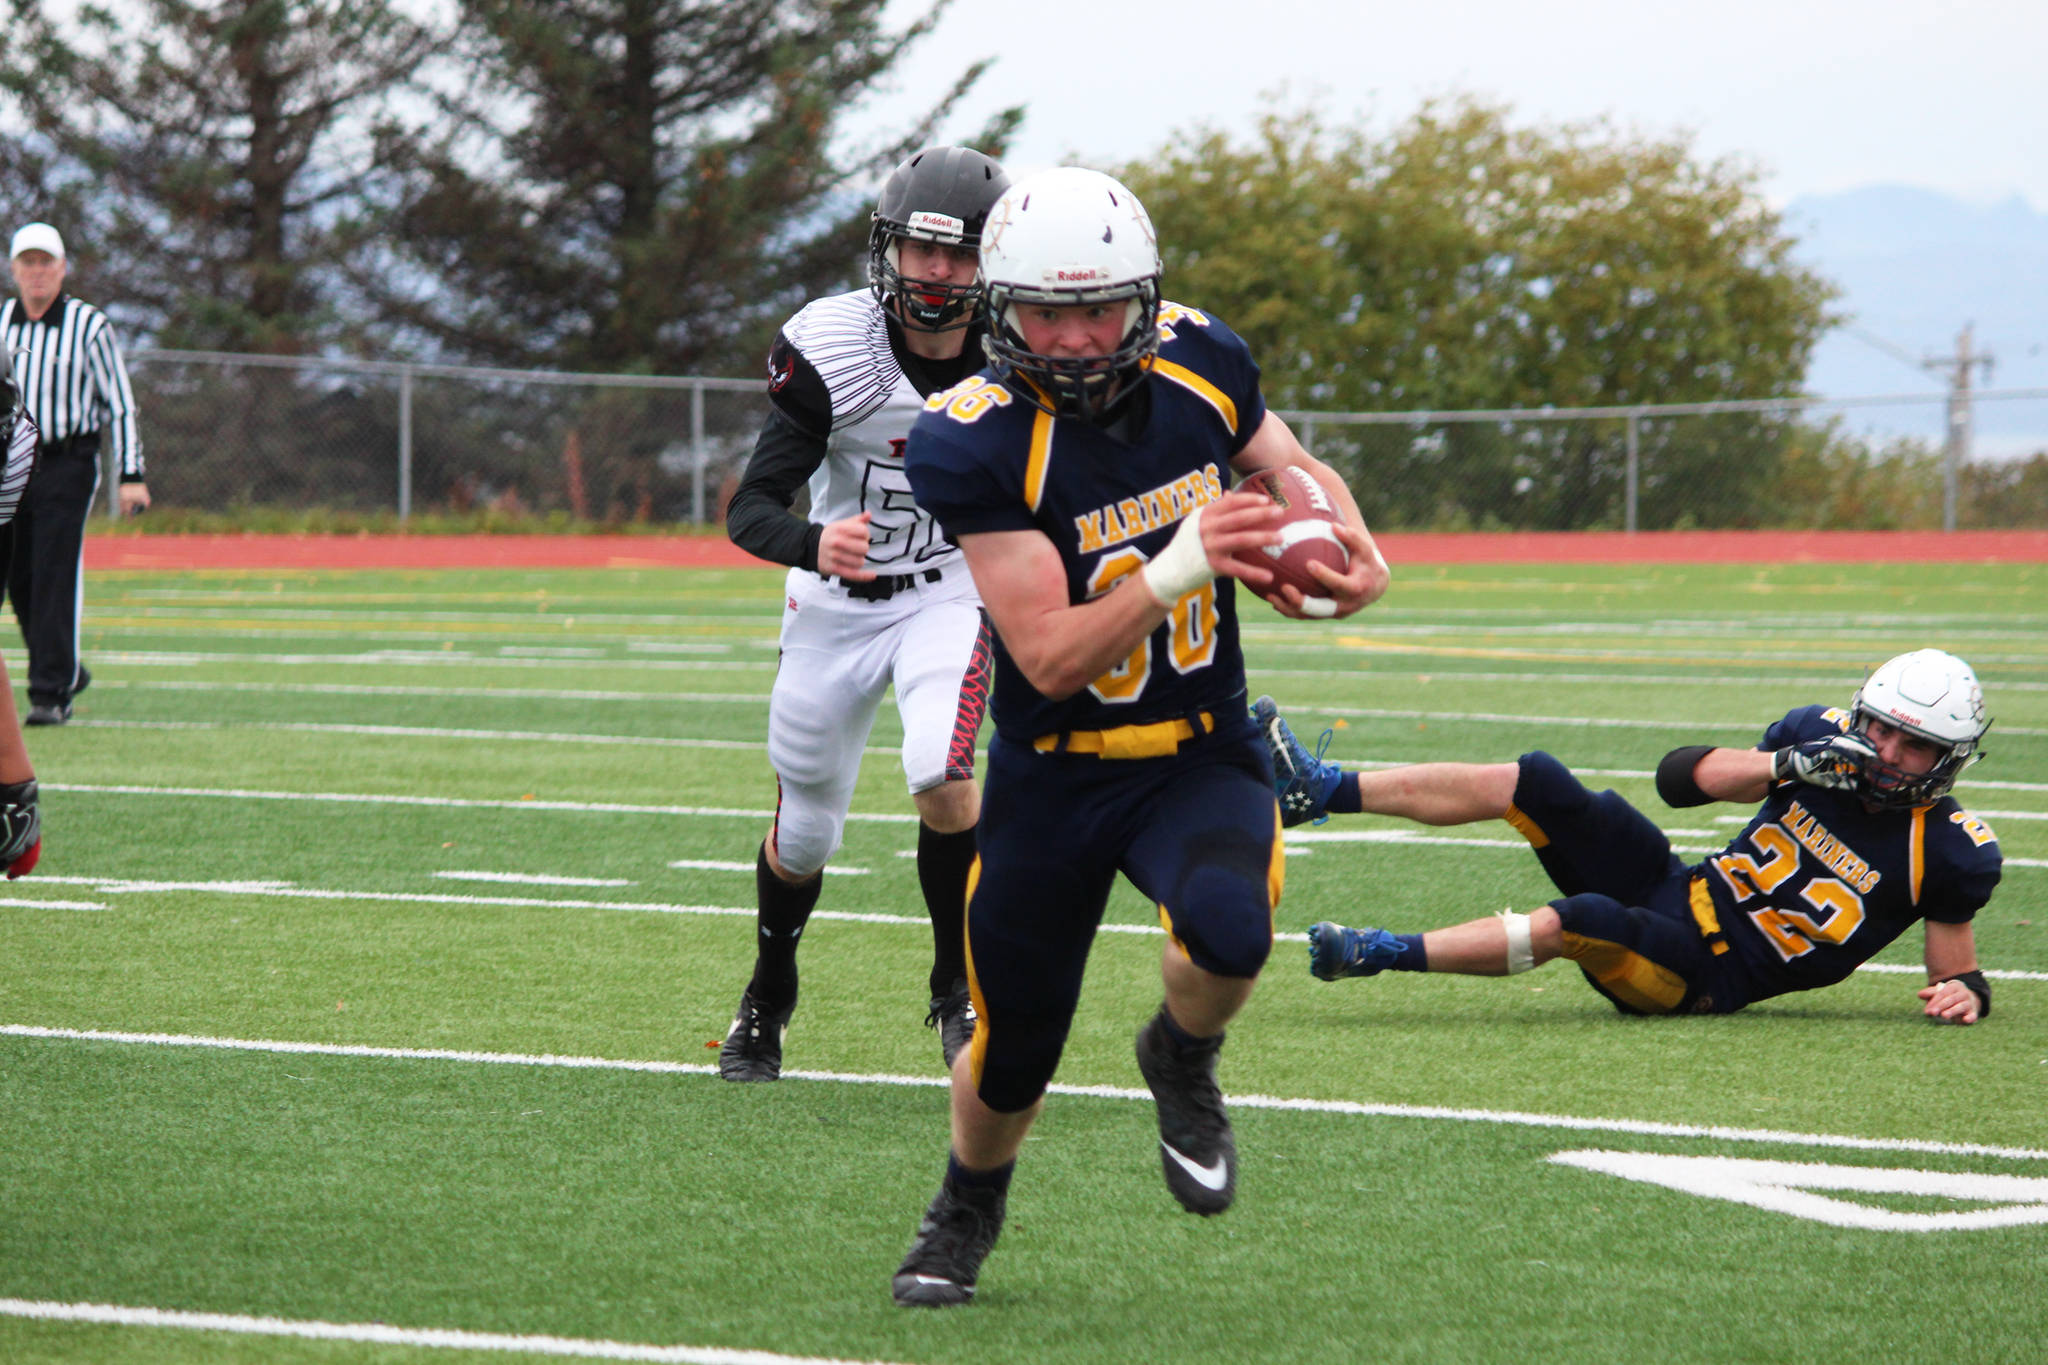 Senior Jack Heimbold runs the ball during the Homer varsity football team’s Saturday, Oct. 7, 2017 game against Ben Eielson High School in Homer, Alaska. The Mariners topped the Ravens 33-21 and will head to the ASAA First National Bowl Series Division III Championship. (Photo by Megan Pacer/Homer News)